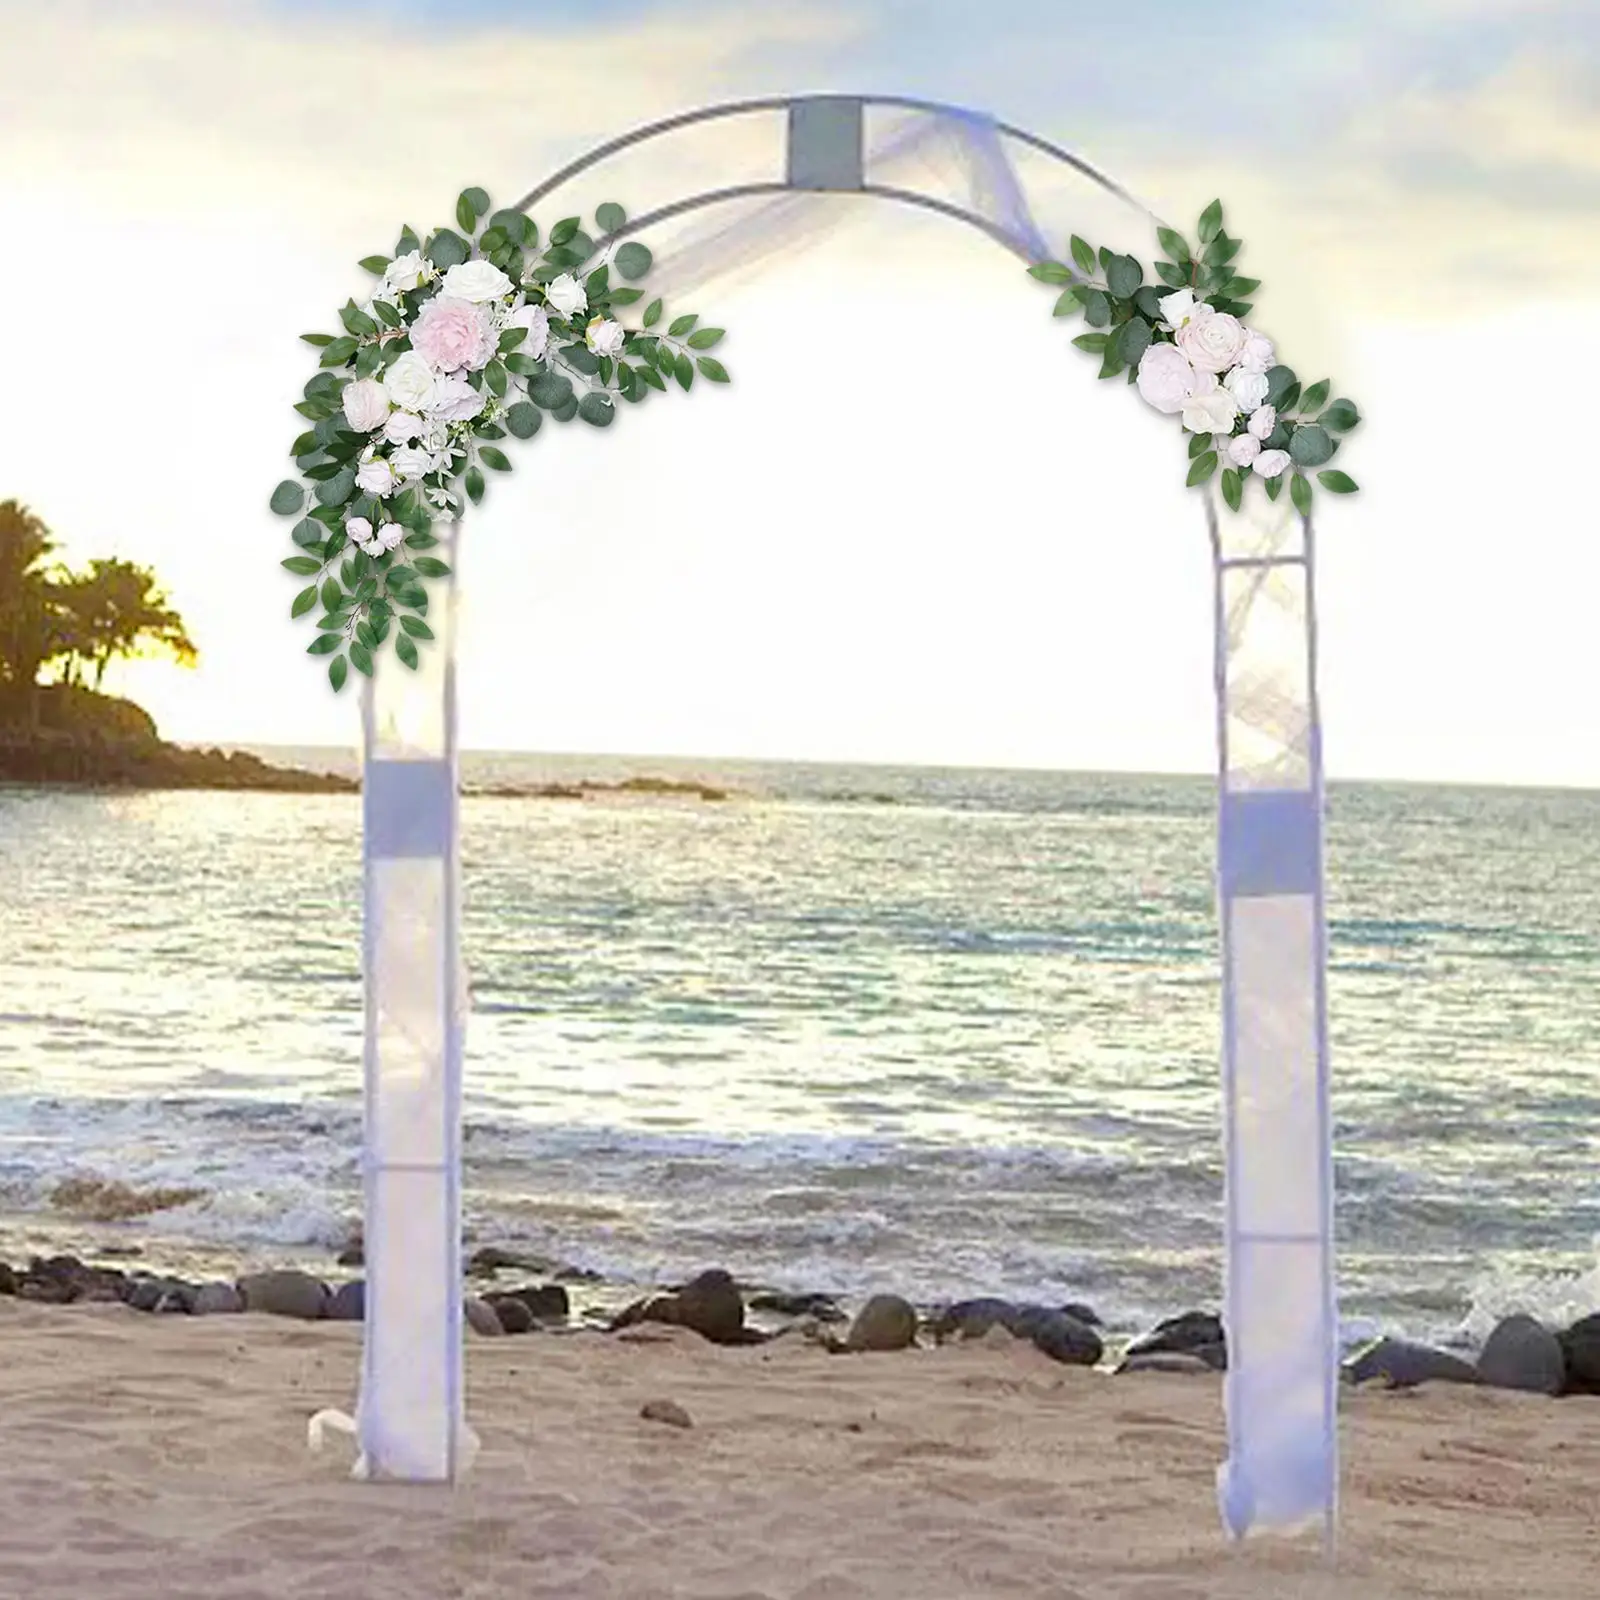 2 Pieces Rose Flower Swag Arch Wedding Arch Flowers Kit Swag Garland Display Fake Plant for Window Table Centerpieces Wedding